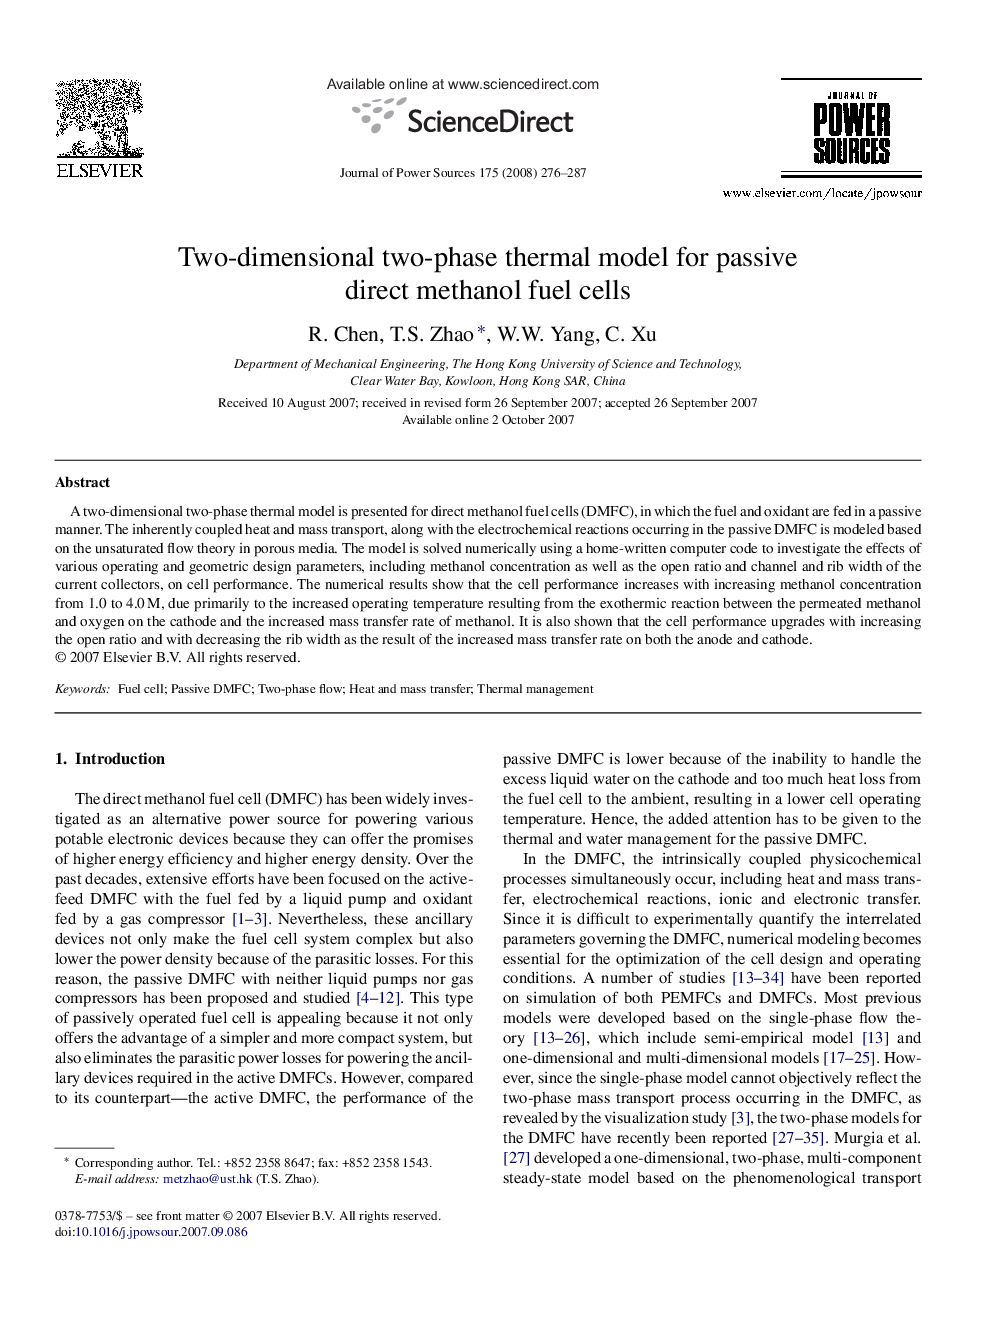 Two-dimensional two-phase thermal model for passive direct methanol fuel cells